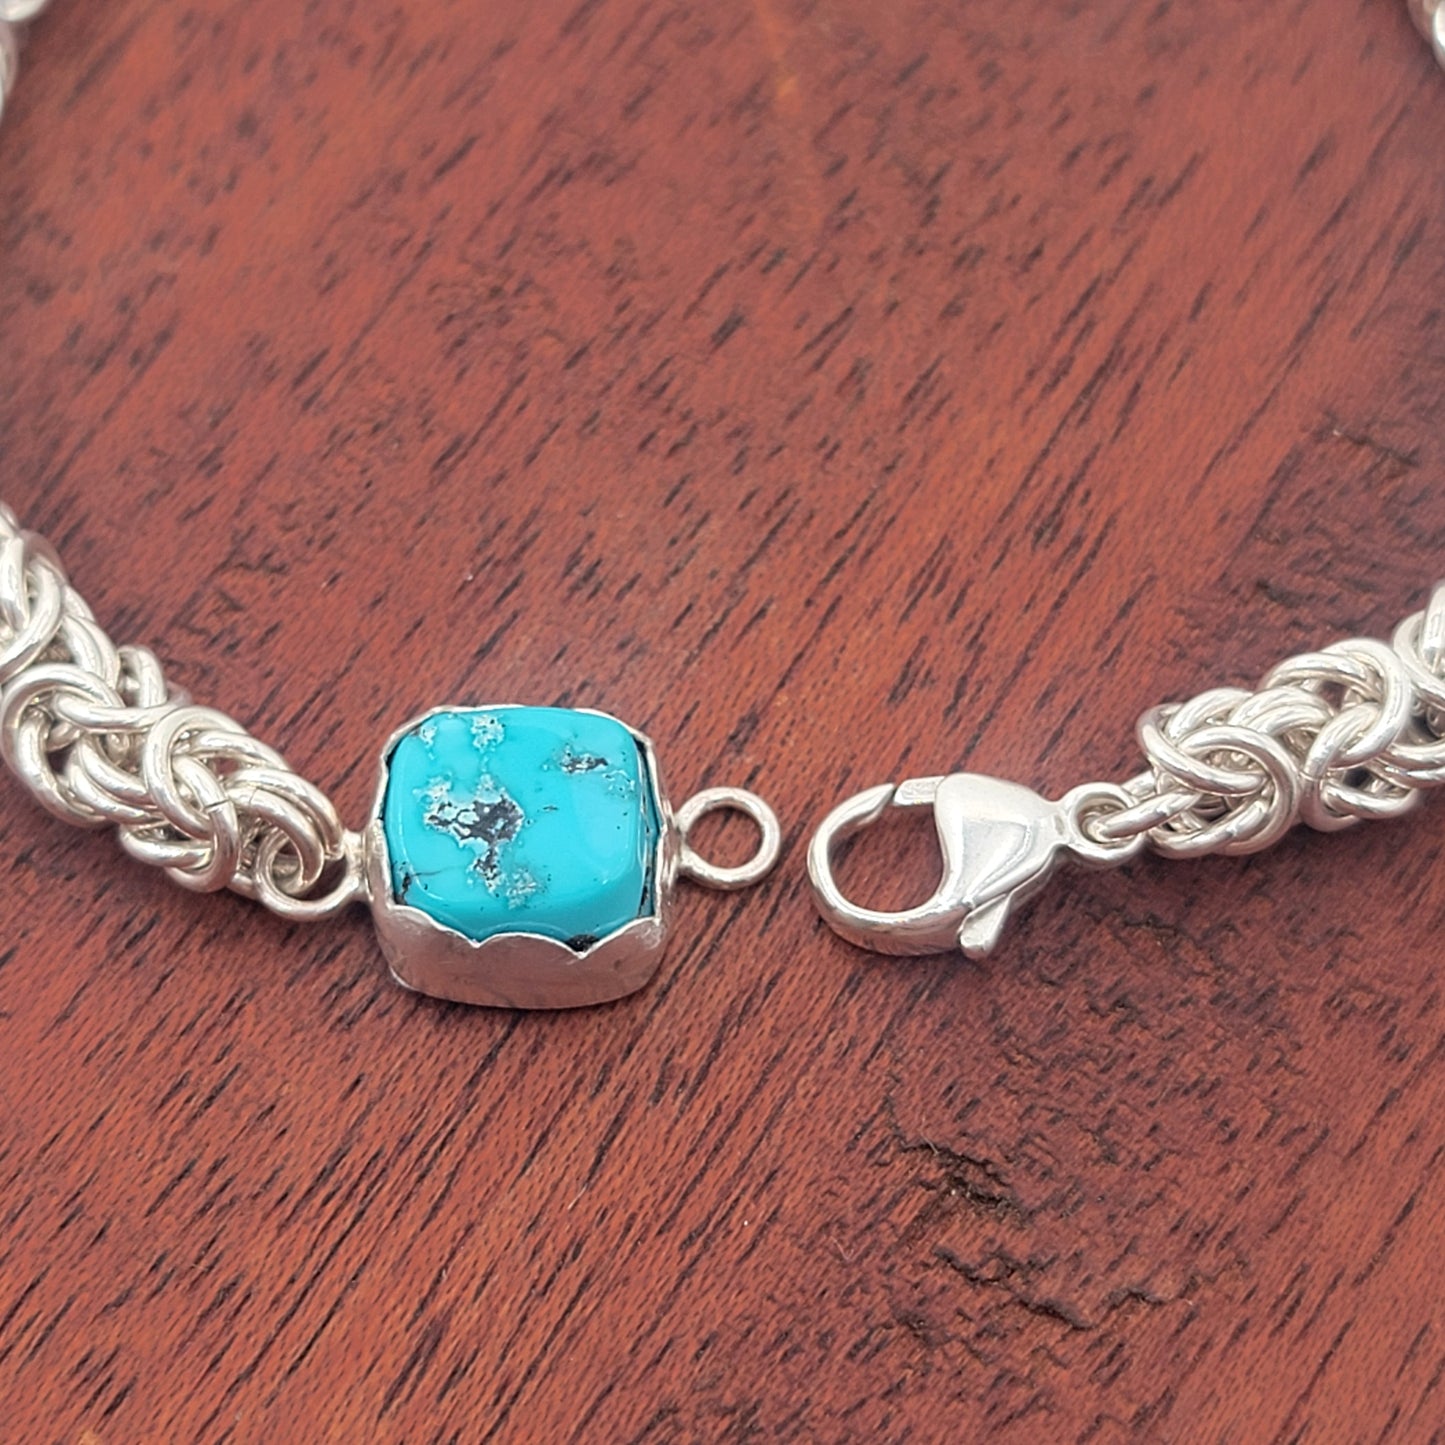 Small Silver Chain Bracelet with Turquoise